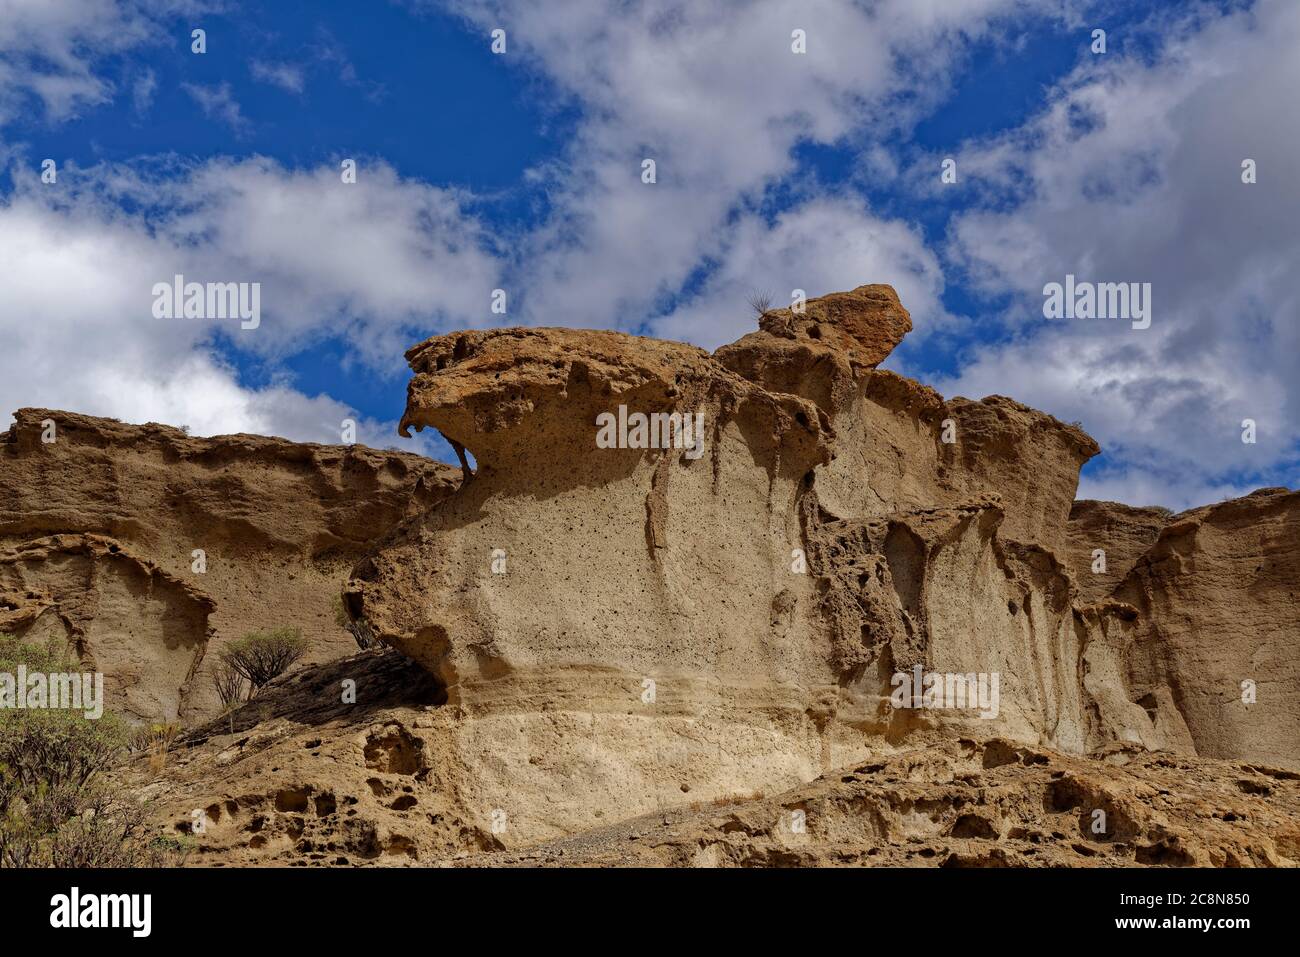 Eroded Volcanic ash and breccia rock deposits forming dramatic Cliffs in a nature Reserve in Tenerife. Stock Photo